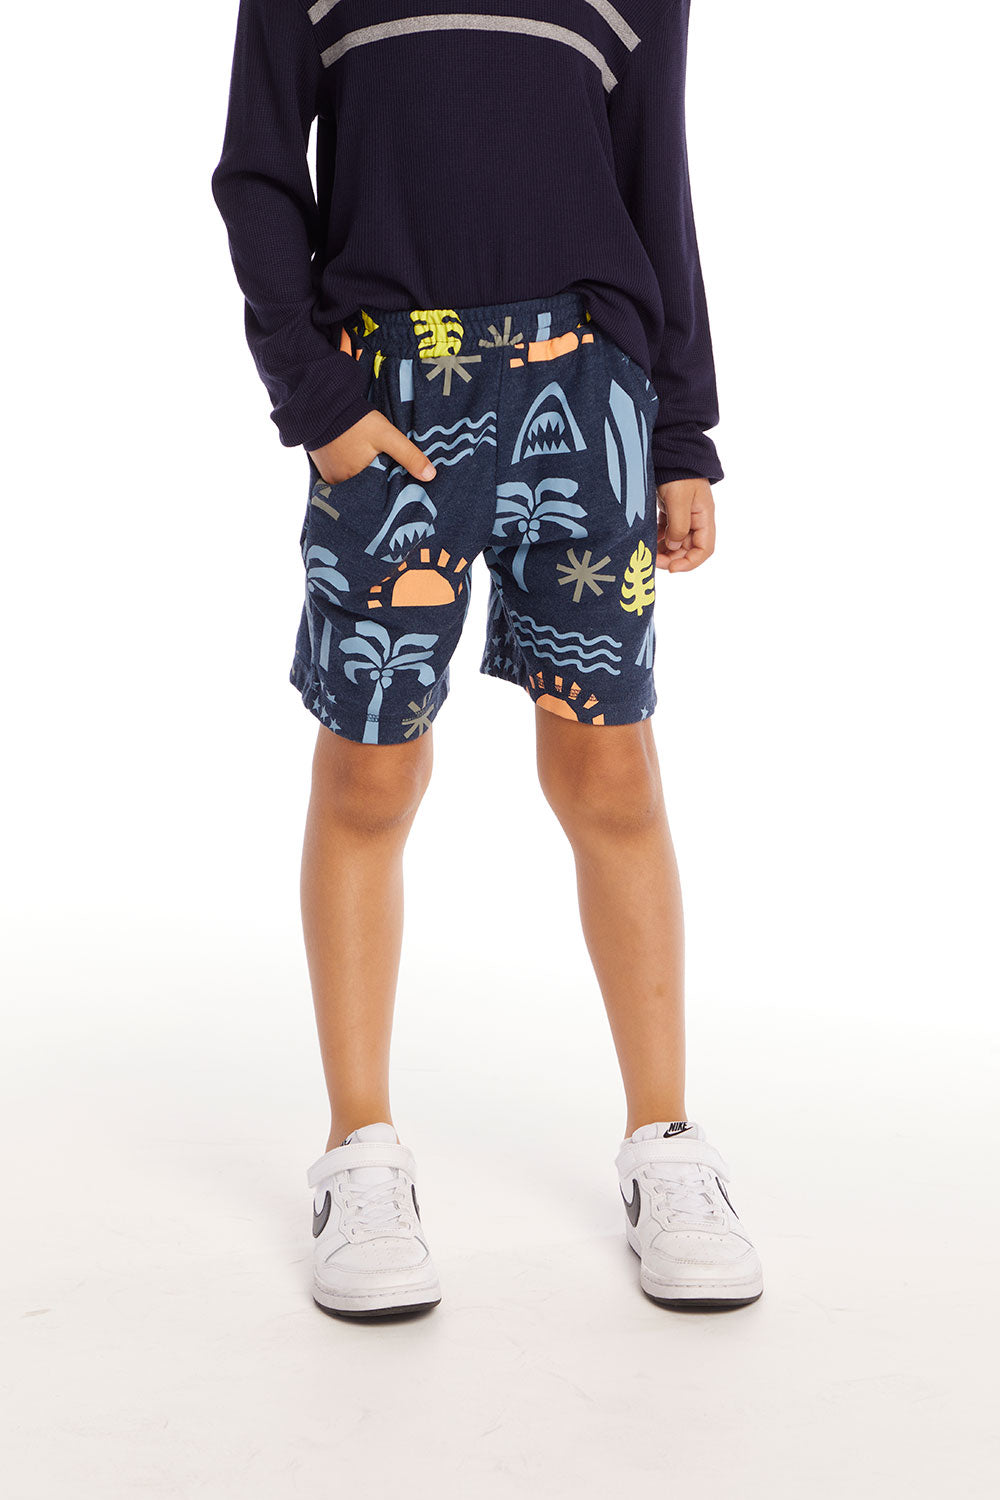 Surf's Up Boys Short BOYS chaserbrand